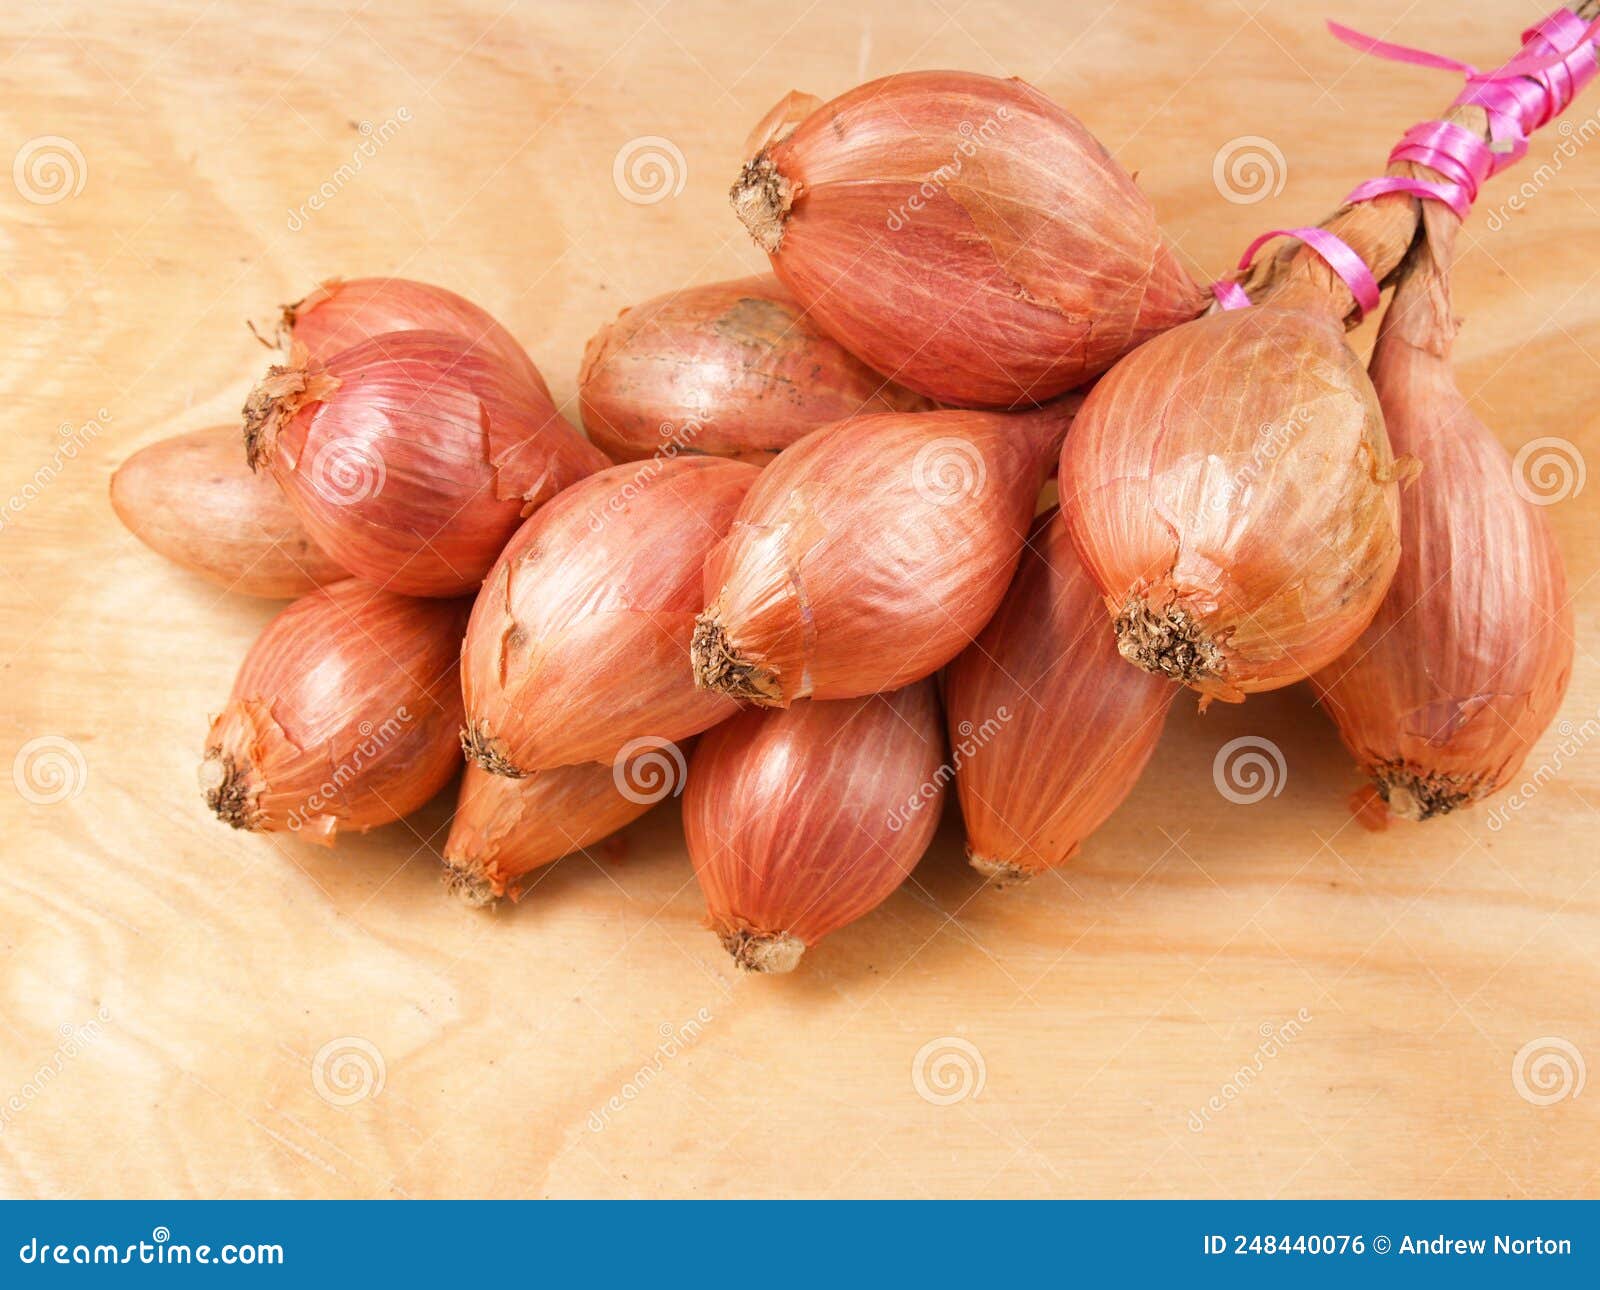 2,843 Banana Shallot Royalty-Free Images, Stock Photos & Pictures